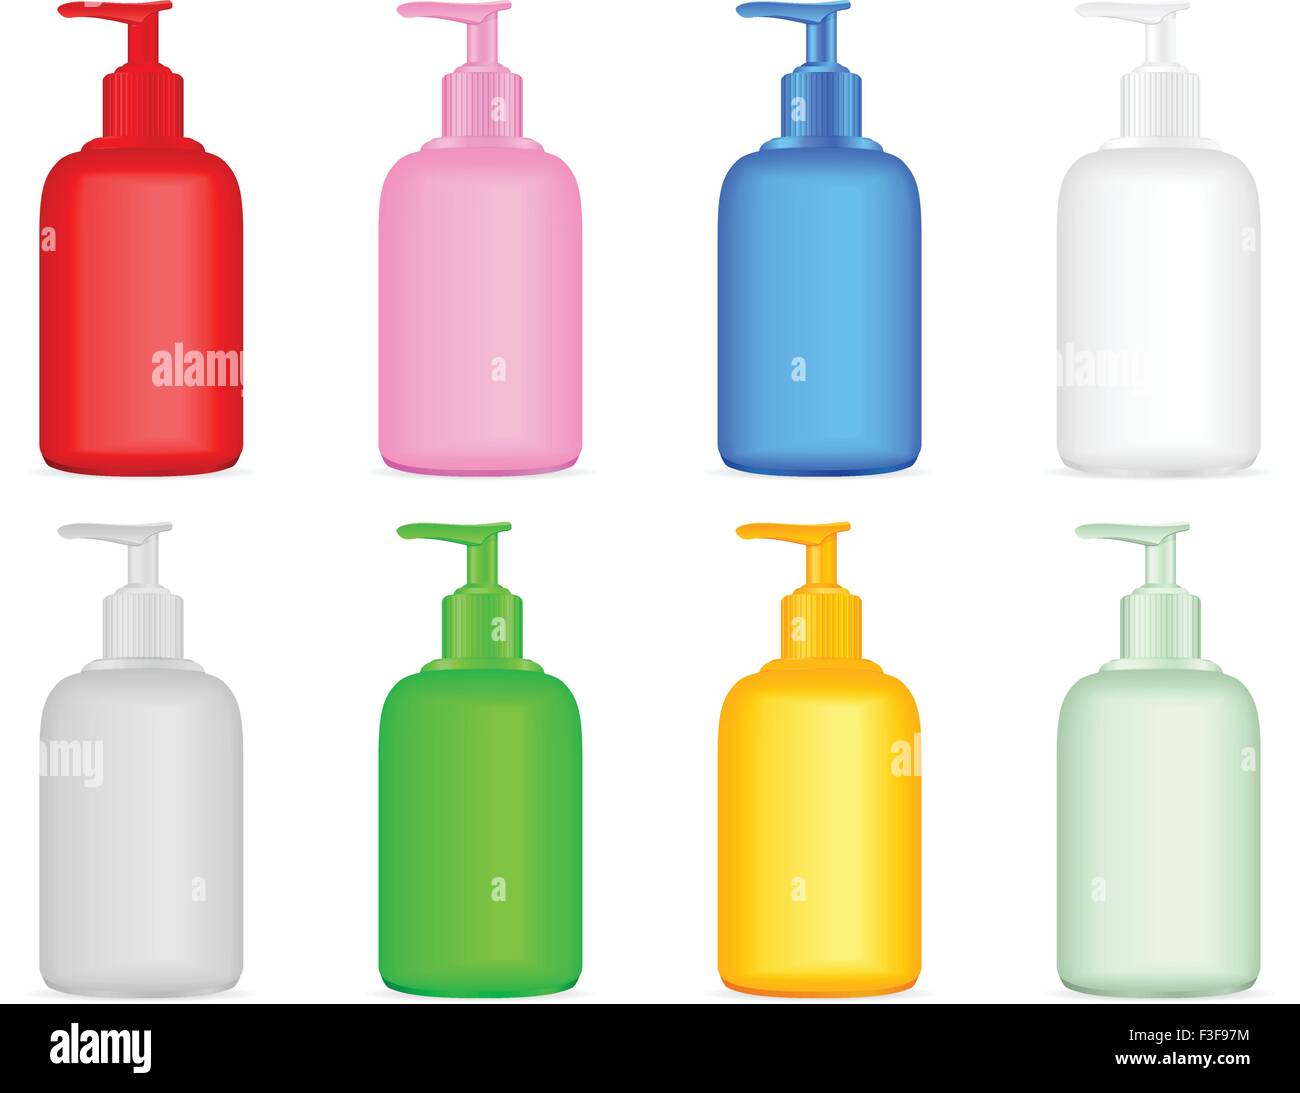 https://c8.alamy.com/comp/F3F97M/liquid-soap-container-set-on-a-white-background-vector-illustration-F3F97M.jpg